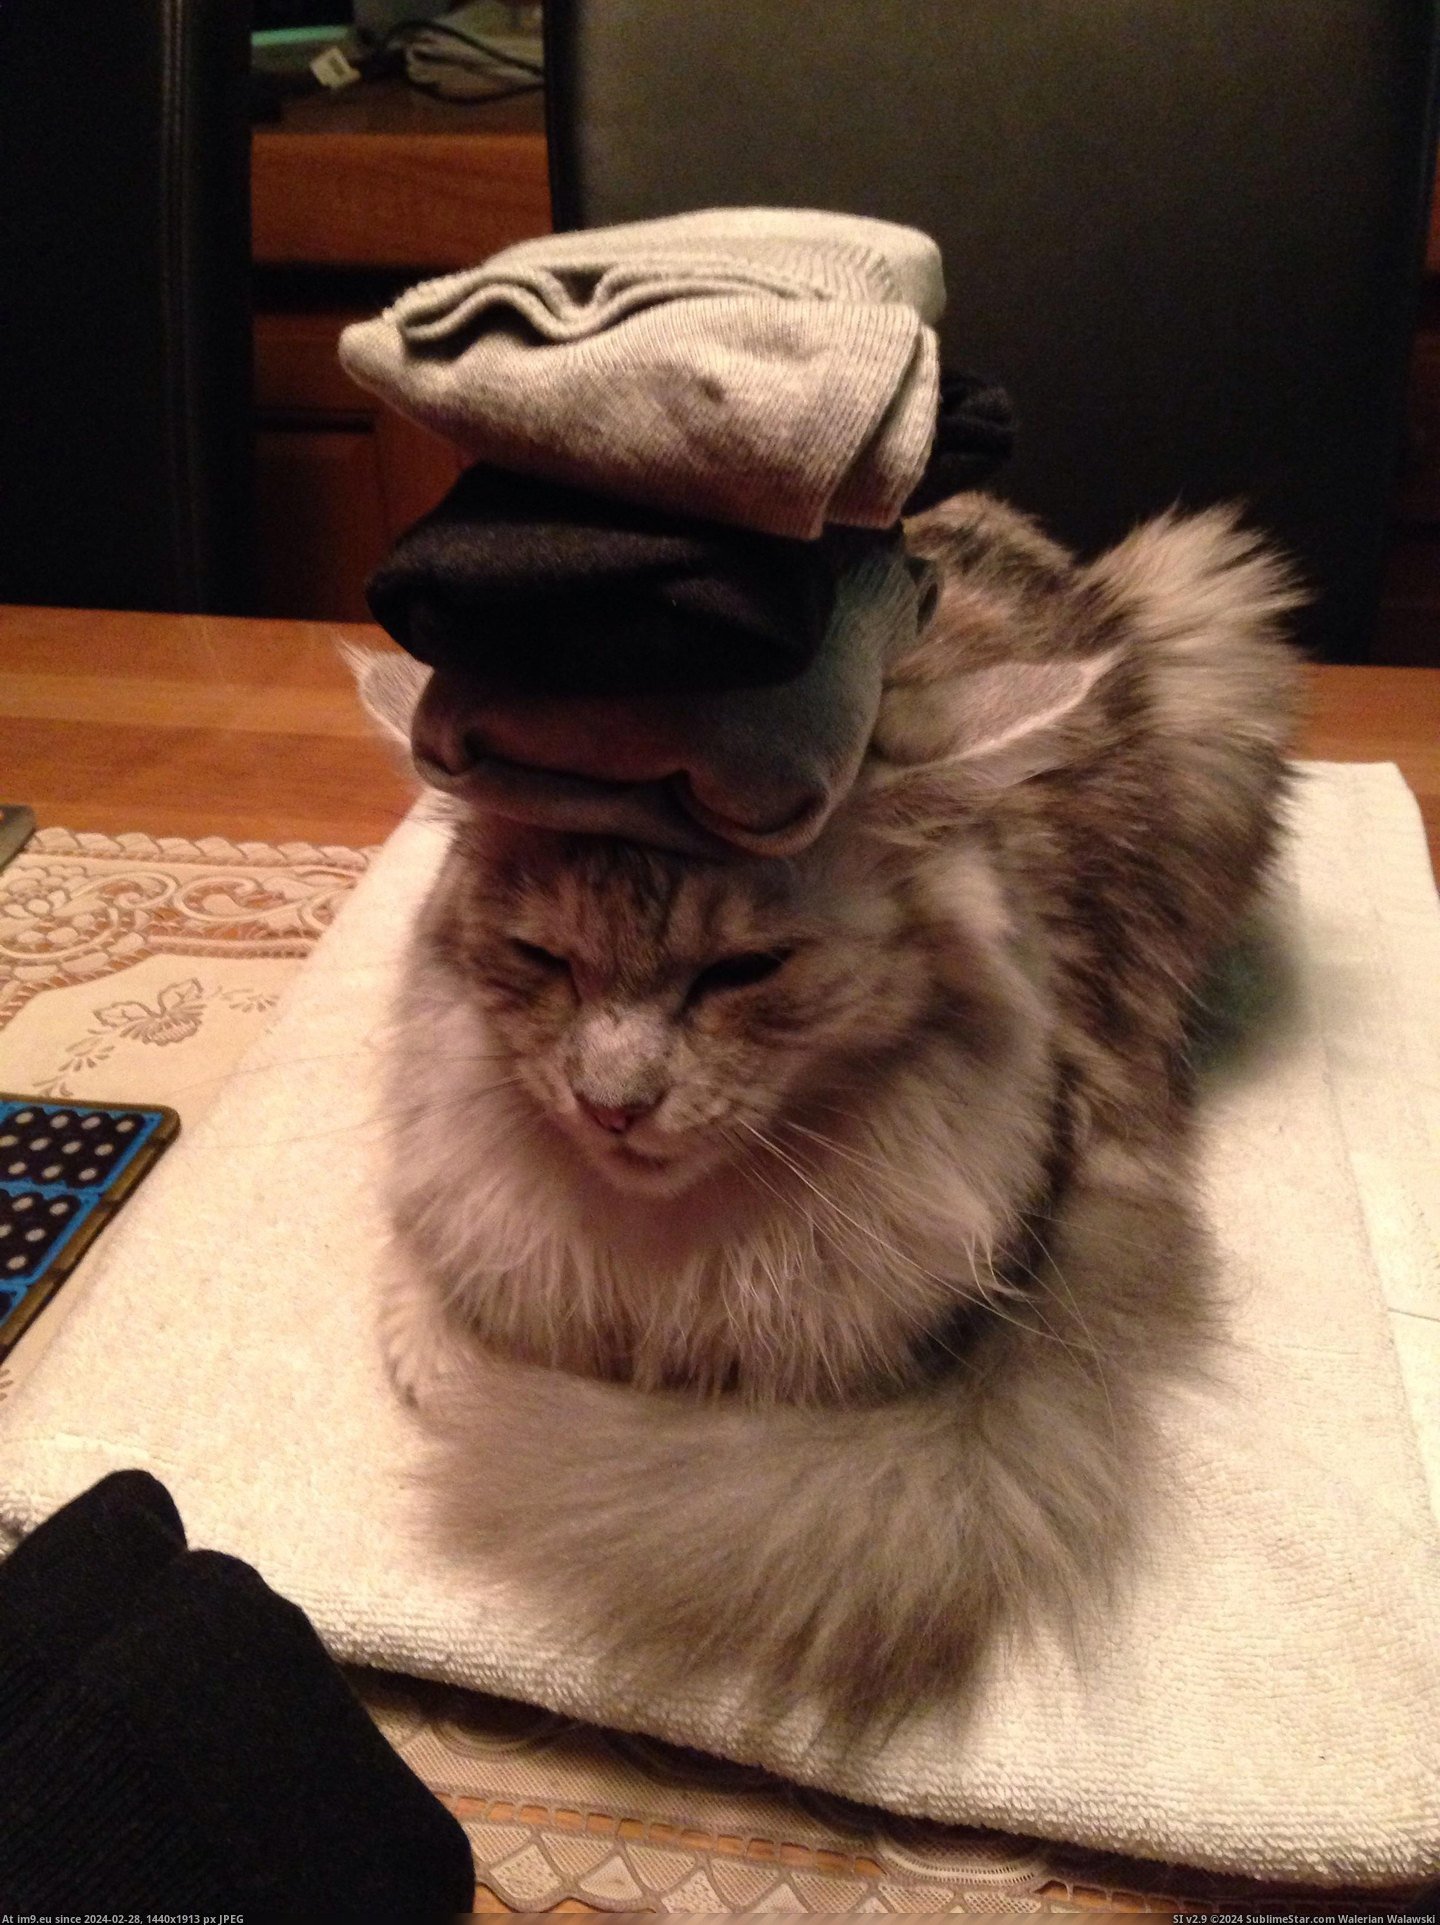 #Cats #Head #Socks #Cat [Cats] Cat with socks on head Pic. (Image of album My r/CATS favs))